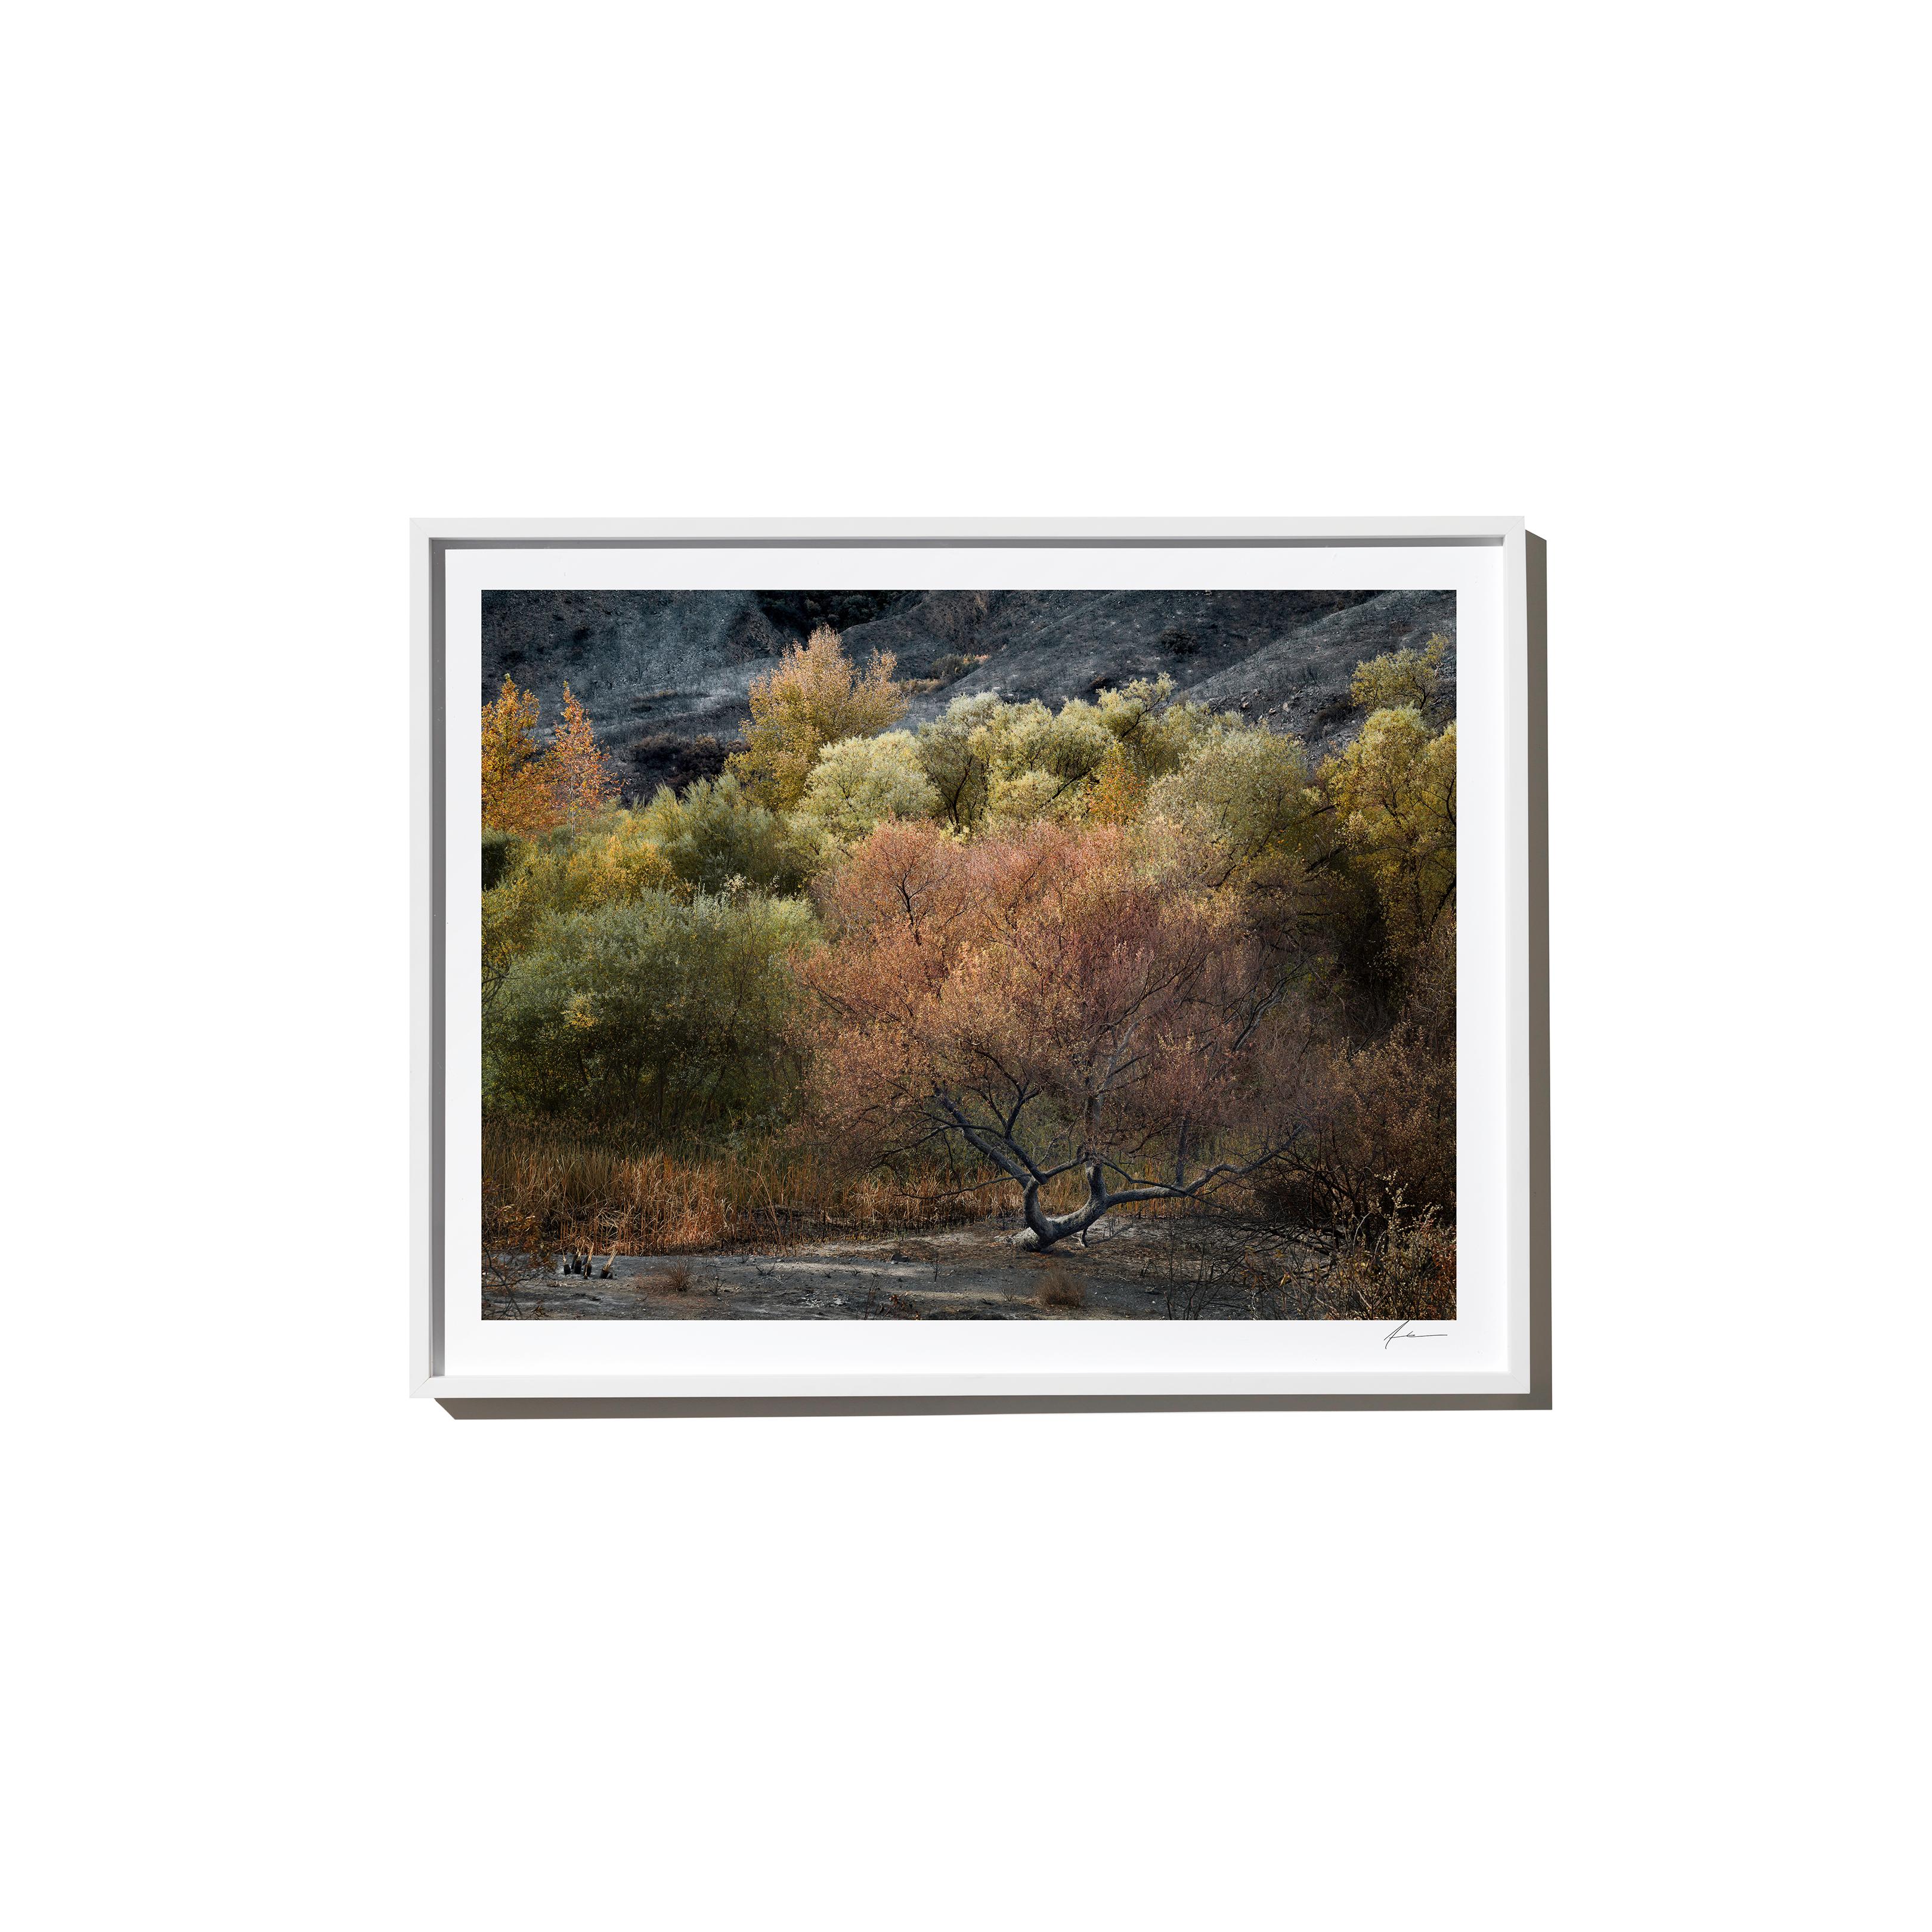 "Yes and No" is a framed color landscape photograph by Los Angeles-based photographer Timothy Hogan. 

Frame available in white or black, please specify on order. Please allow 15 days for production before shipping.

Editions and sizes as